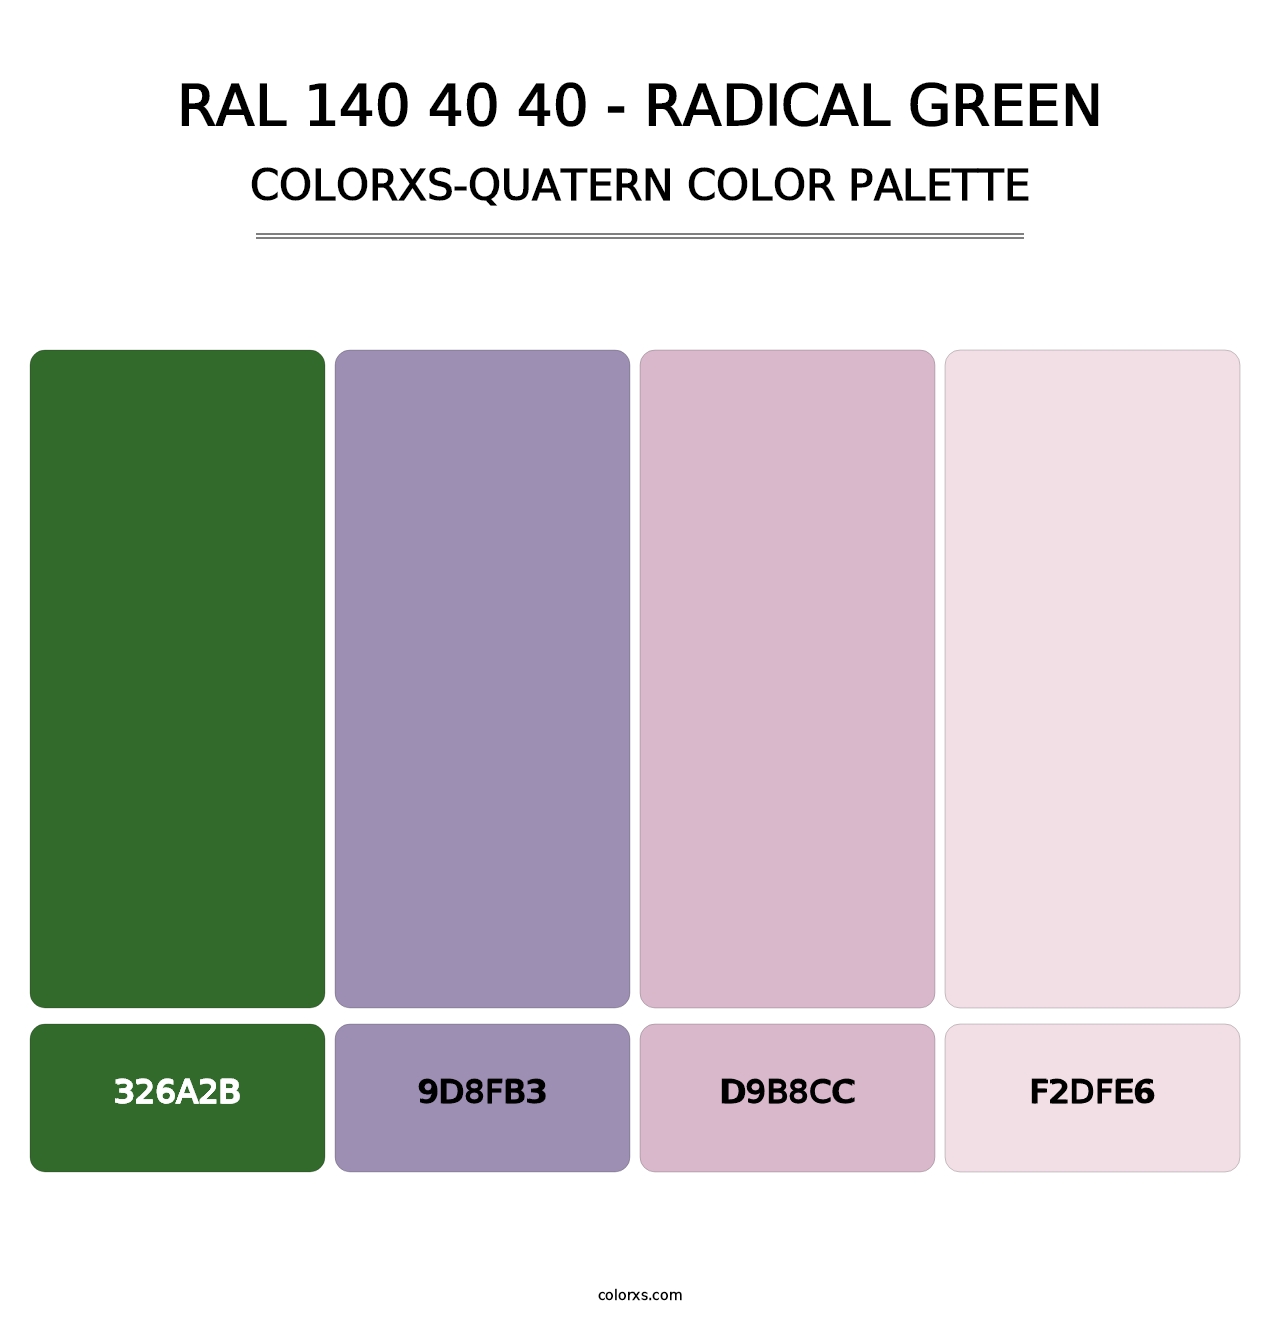 RAL 140 40 40 - Radical Green - Colorxs Quatern Palette